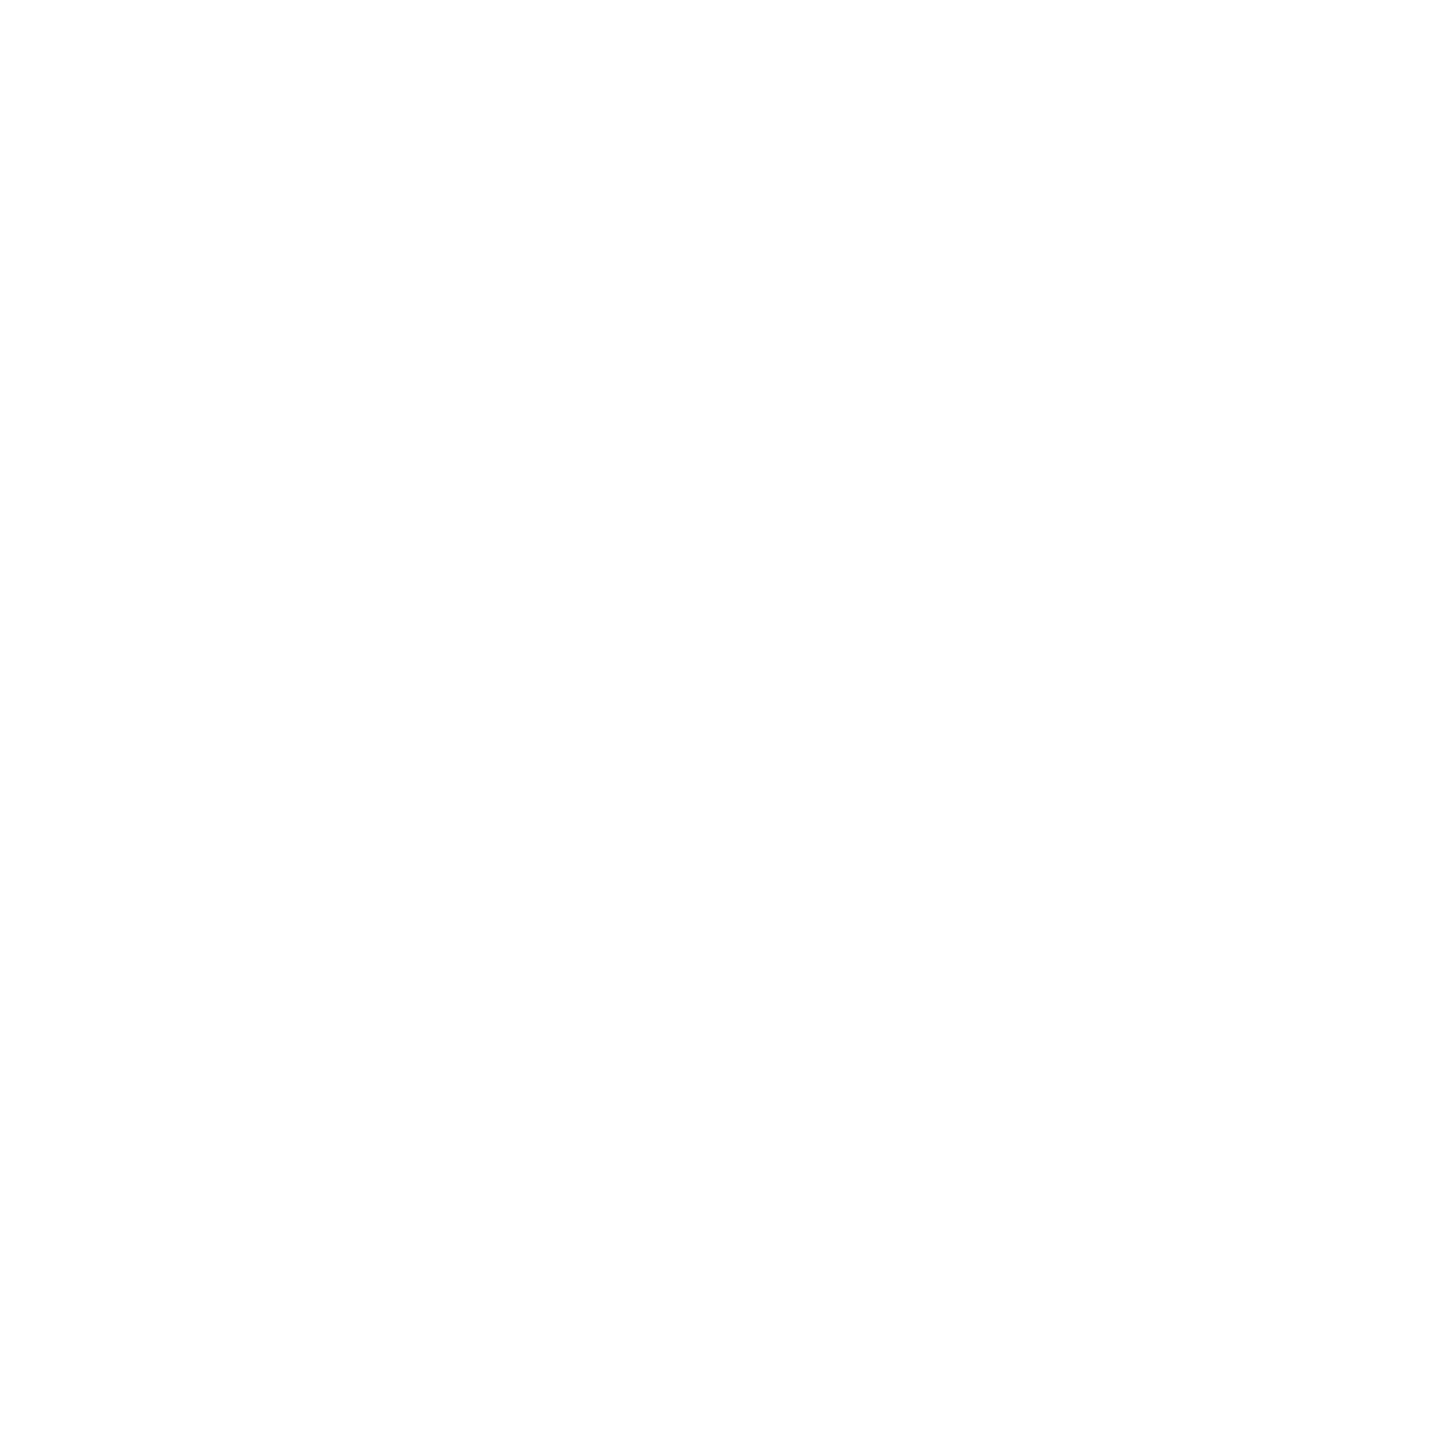 Pastor Champion - I Just Want To Be A Good Man will be Released on April 1, 2022